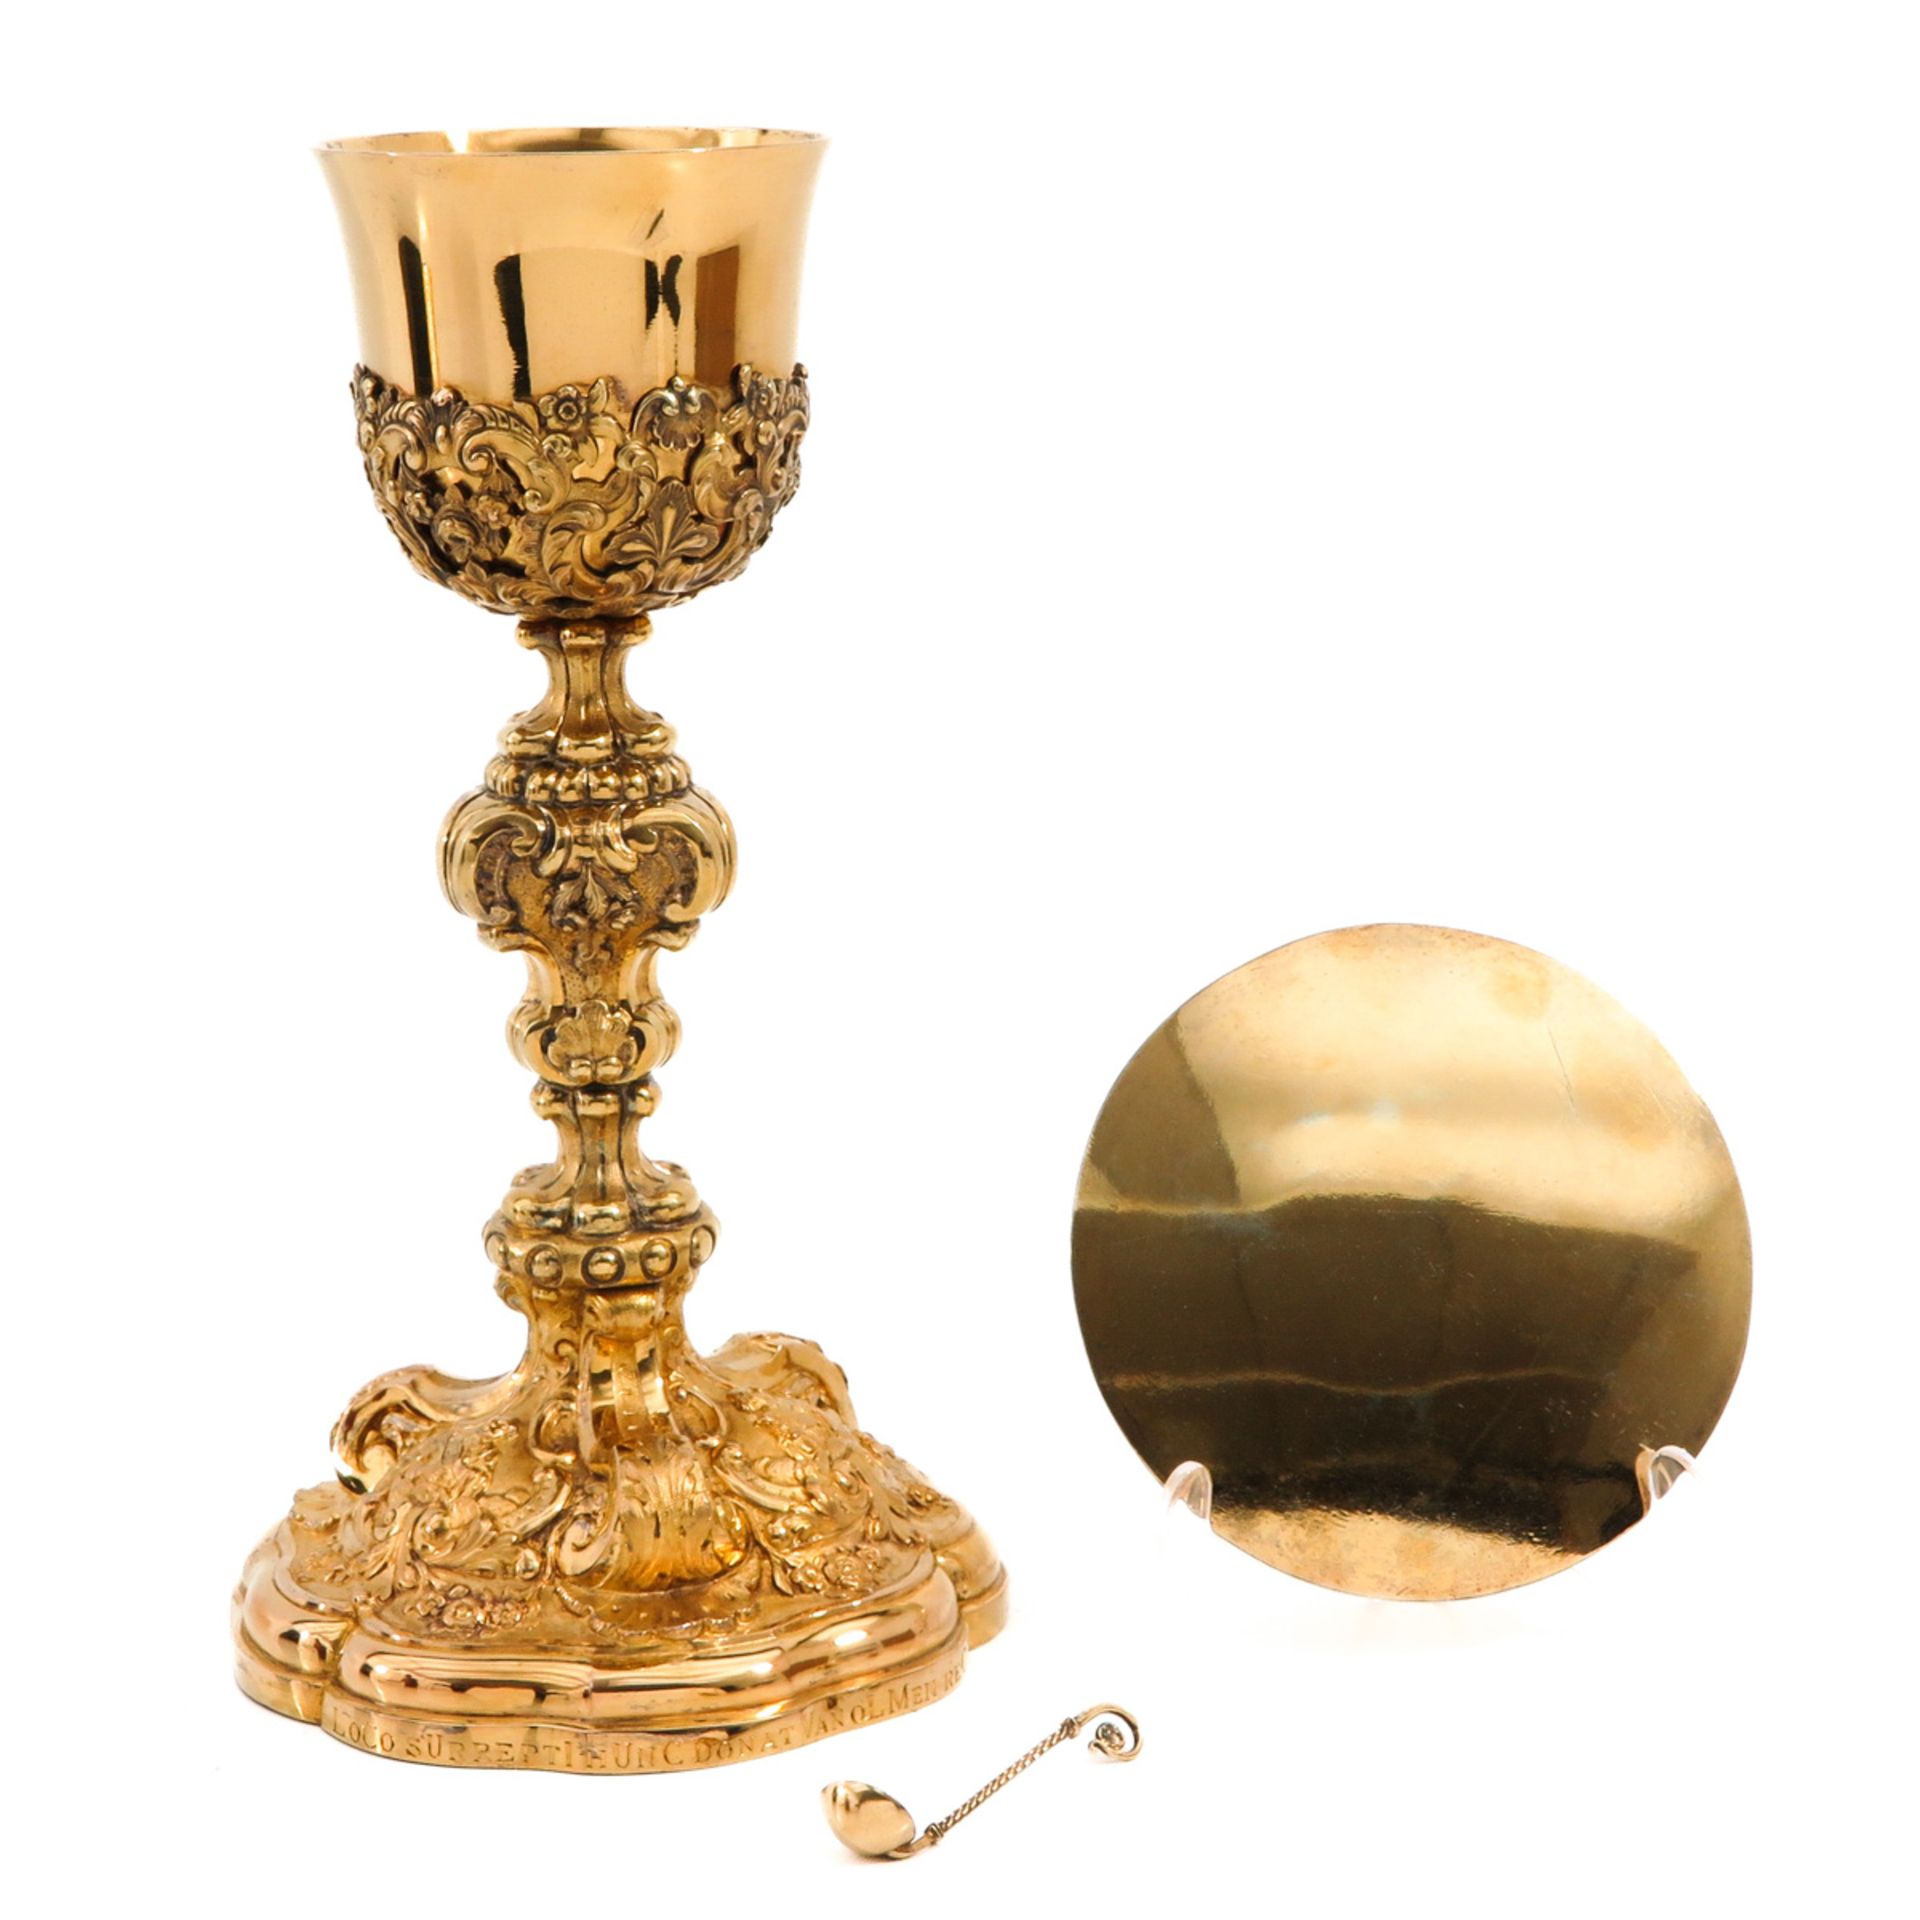 A Very Large 19th Century Gold Plated Silver Chalice